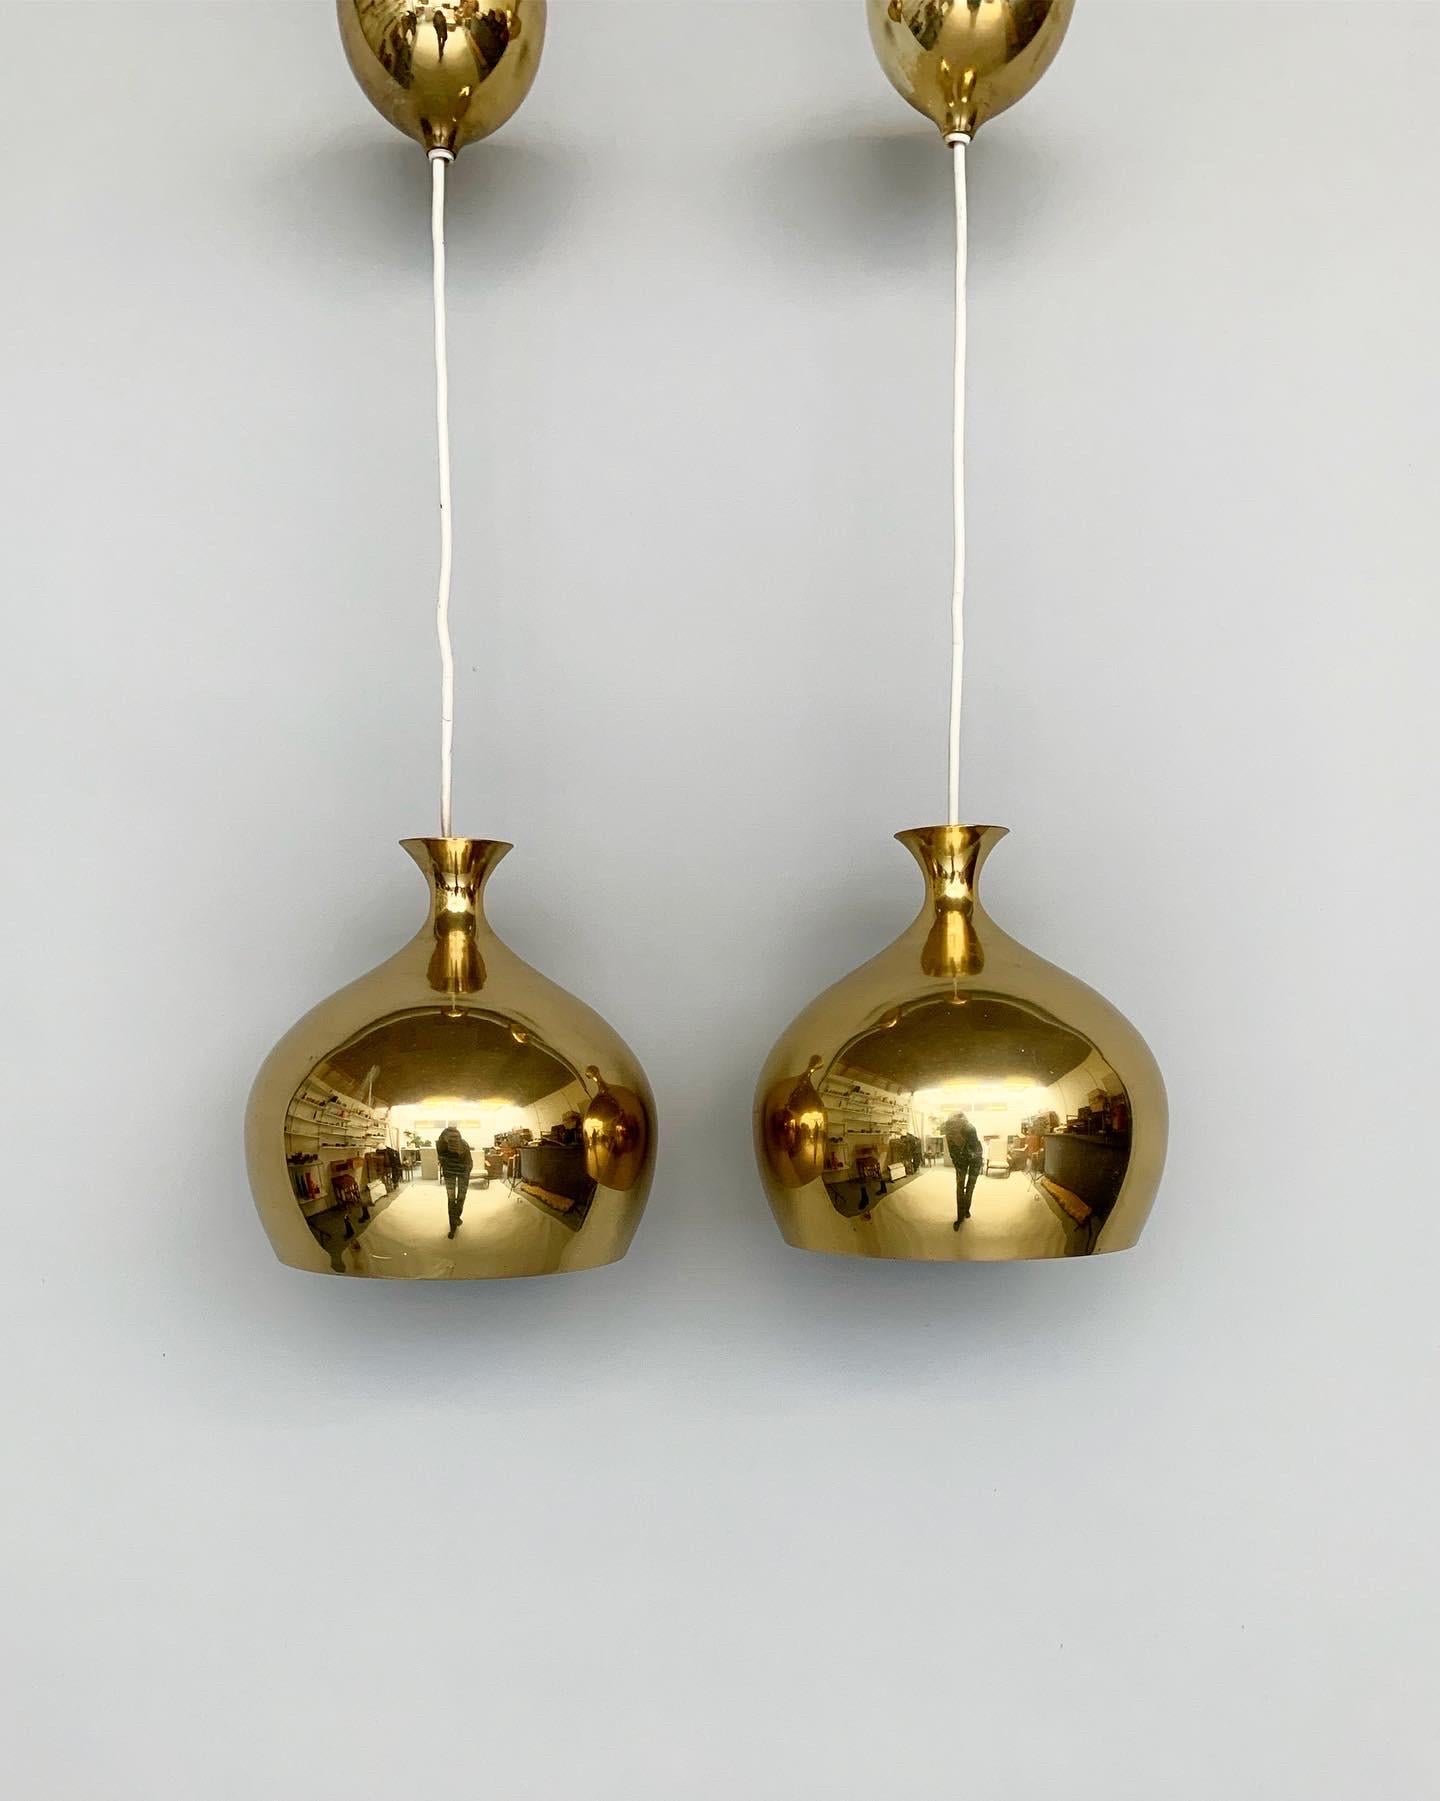 Pair of Helge Zimdal ‚onion‘ pendant lights for Falkenbergs Belysnings, a lighting company based in Sweden in the 1960s.

Made of solid brass with matching brass canopies, beautiful patina with signs of age and a few scratches here and